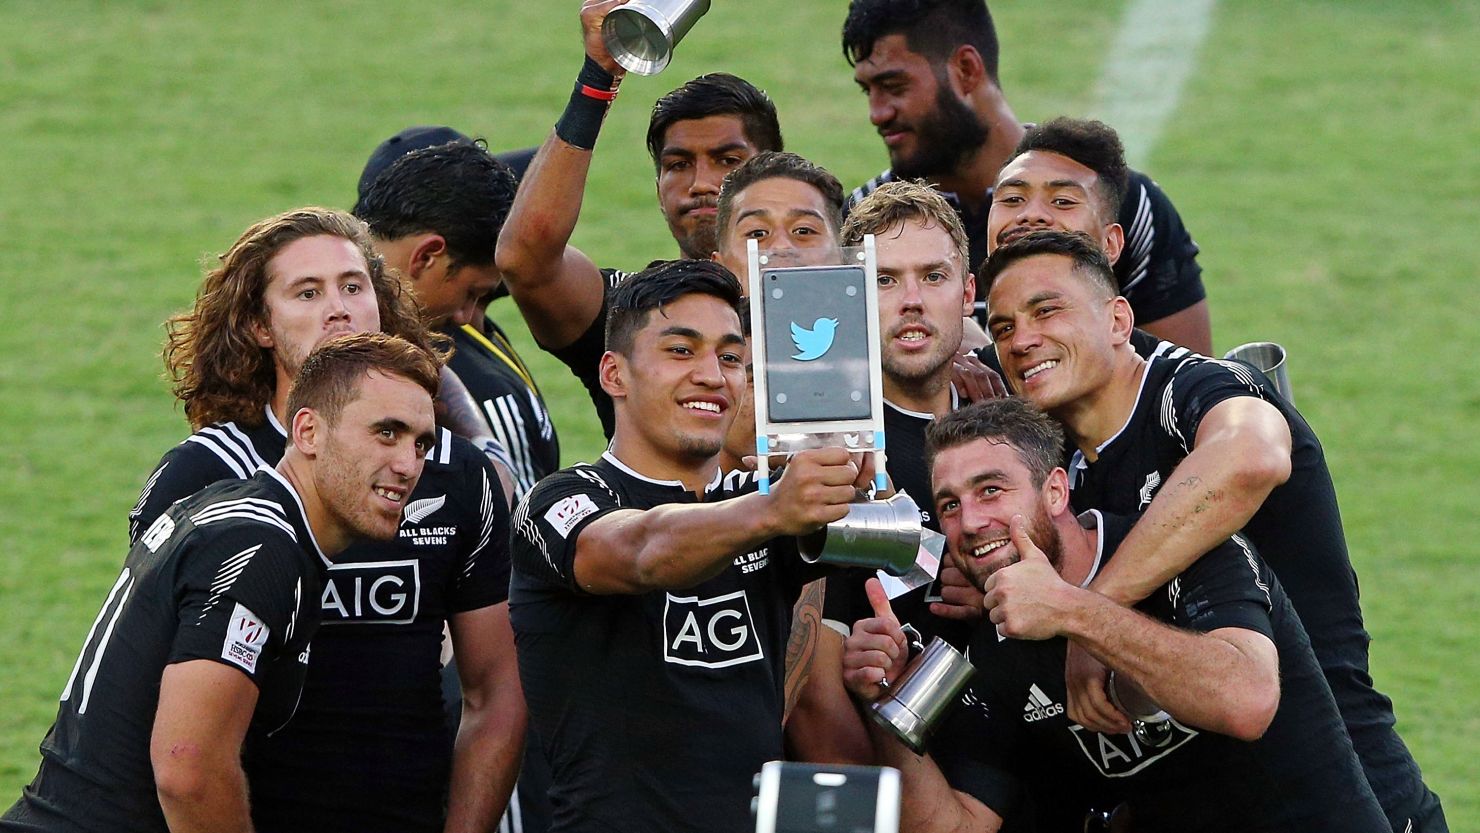 Selfie superstars: The All Blacks team celebrates after its 27-24 win over Australia in the final of the HSBC Sydney Sevens.